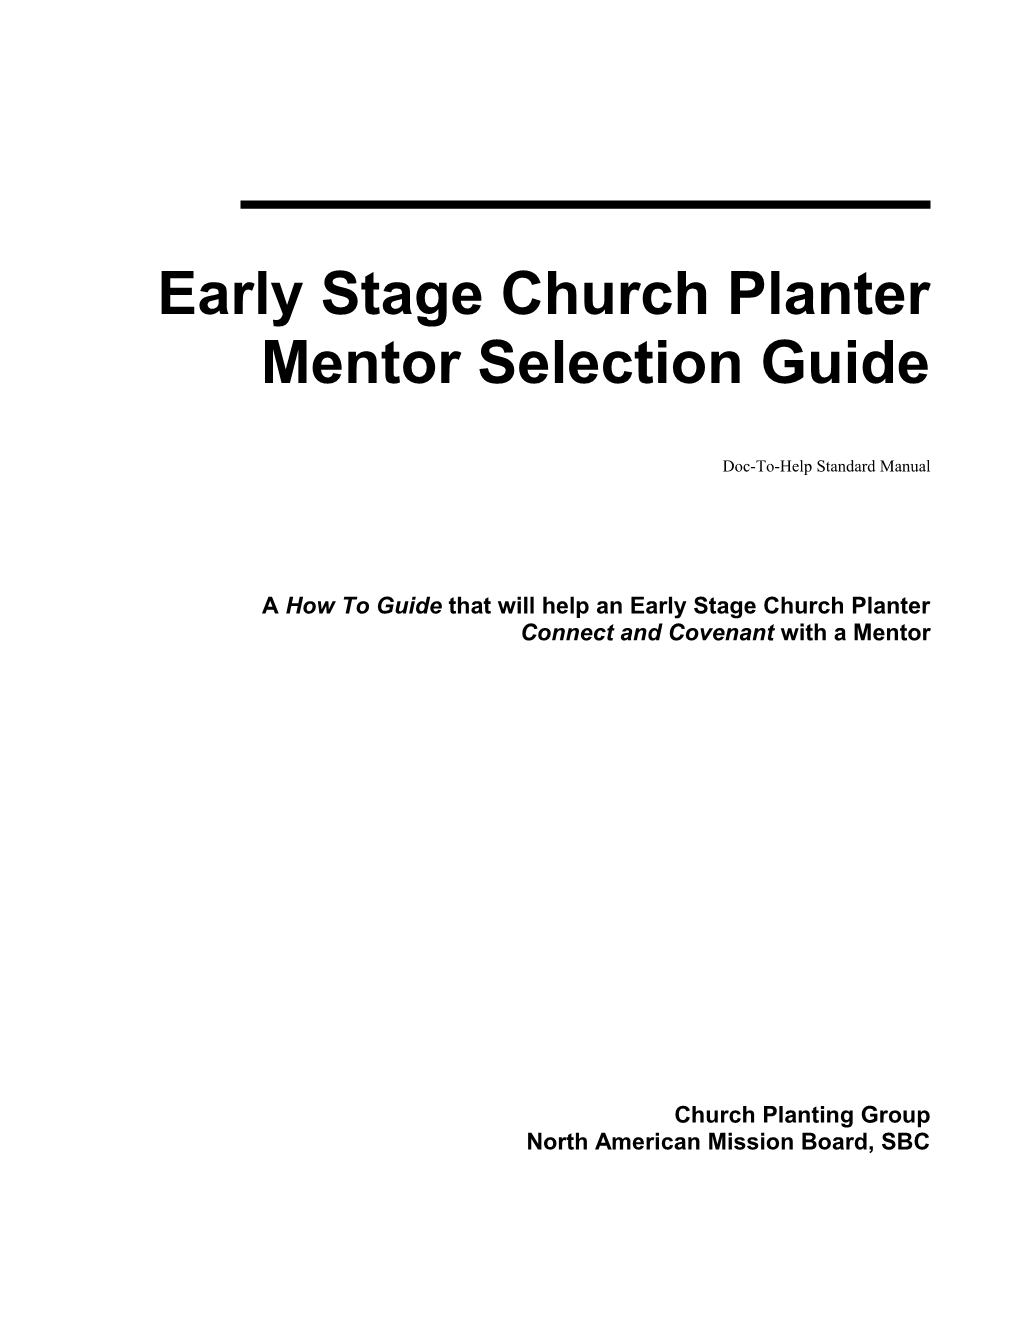 Early Stage Church Planter Mentor Selection Guide